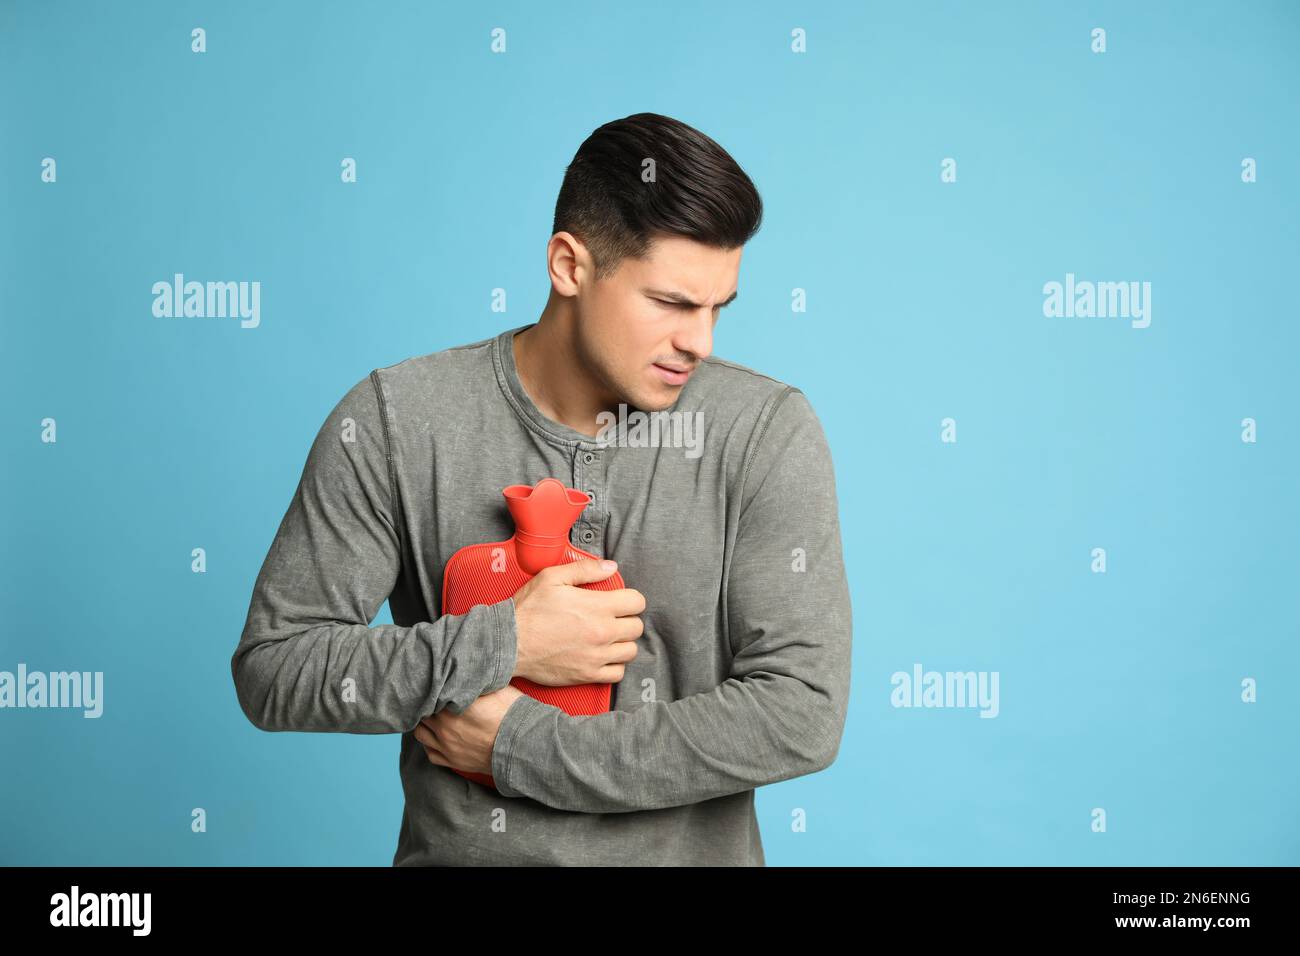 Man using hot water bottle to relieve chest pain on light blue background Stock Photo